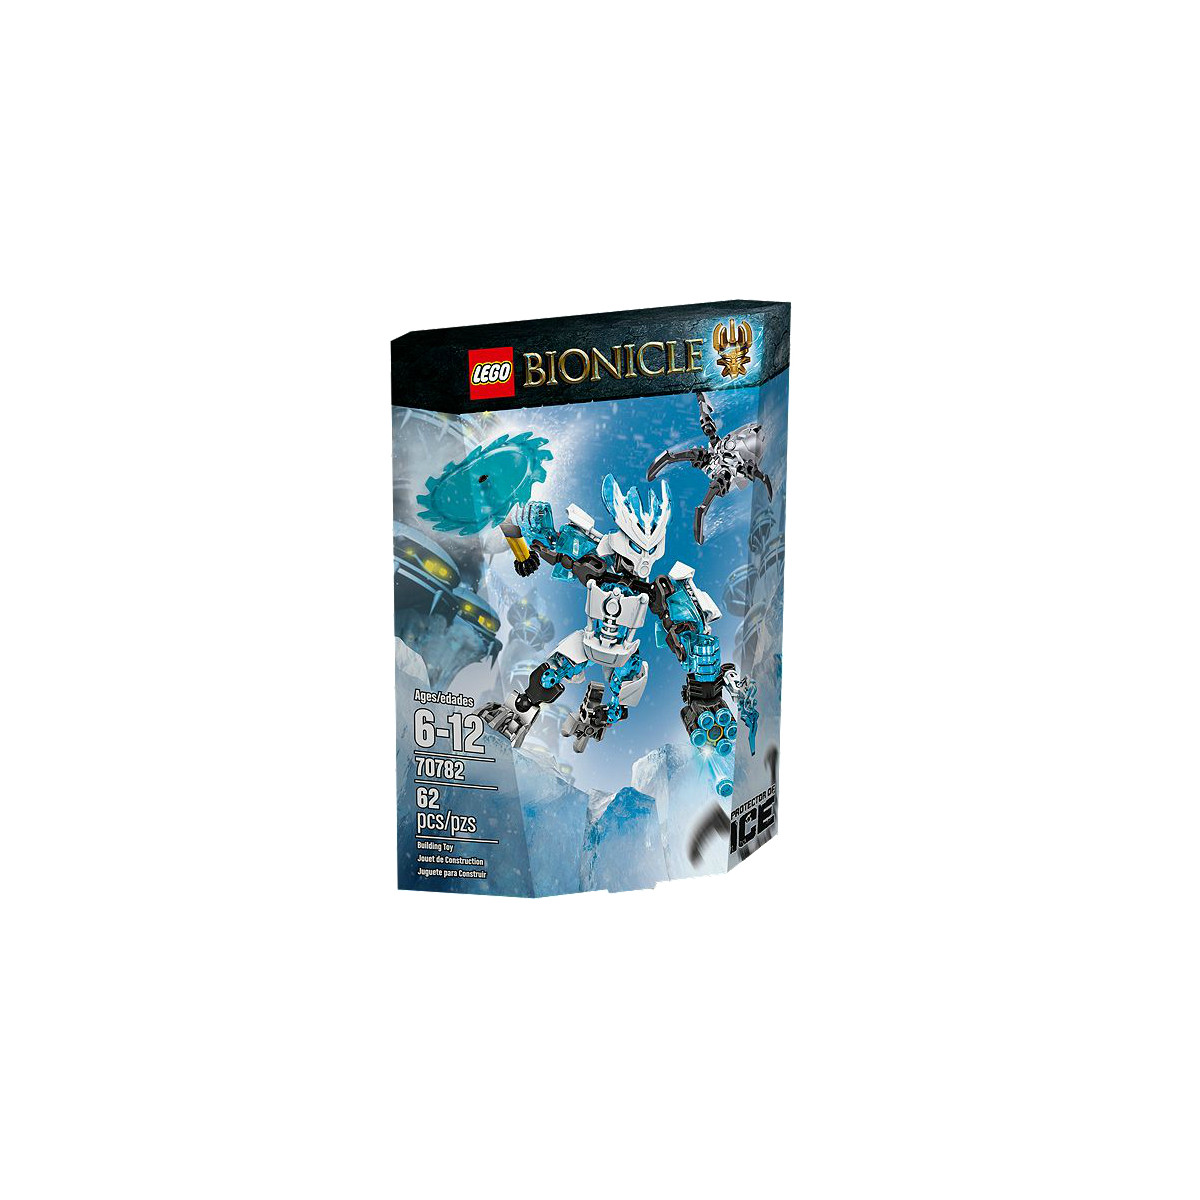 LEGO BIONICLE 70782 - Protector of Ice - Box Crushed